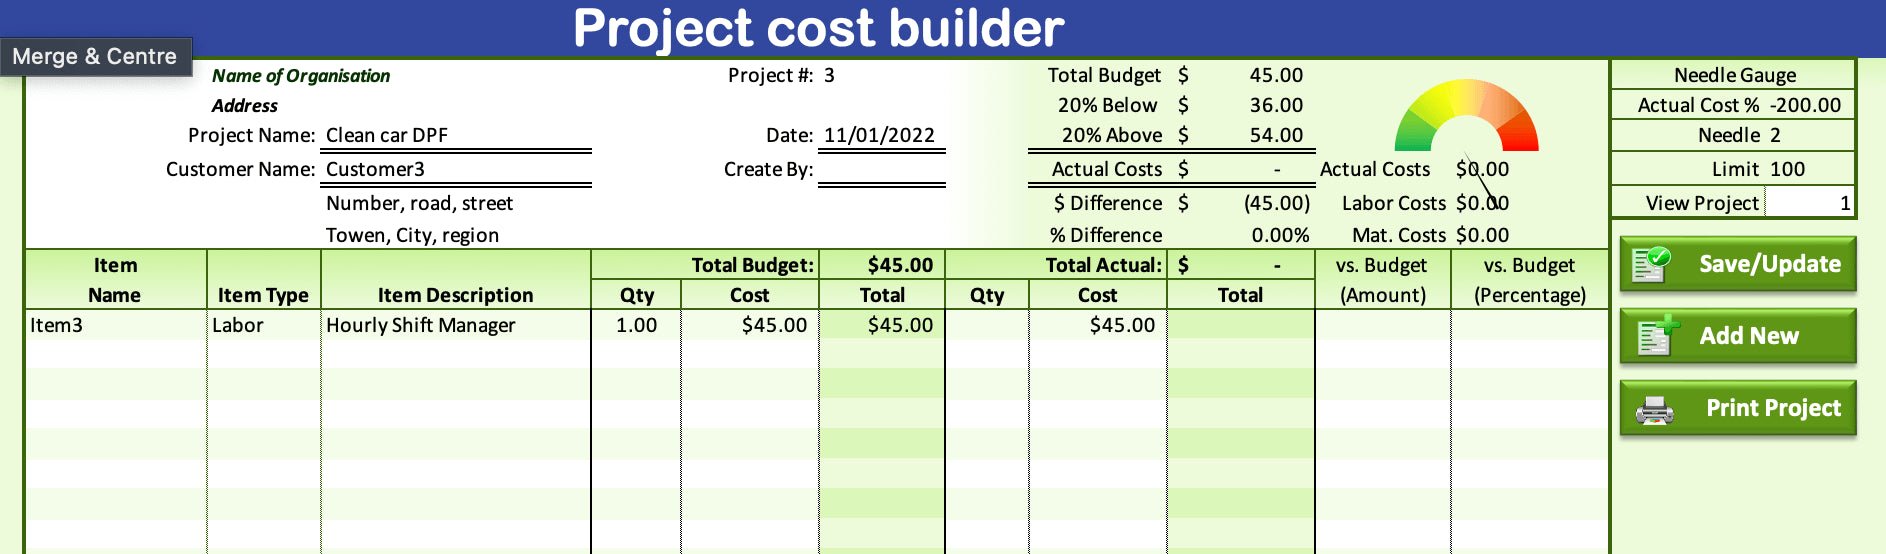 Project Budgeting Template | XLDB Spreadsheet Solutions